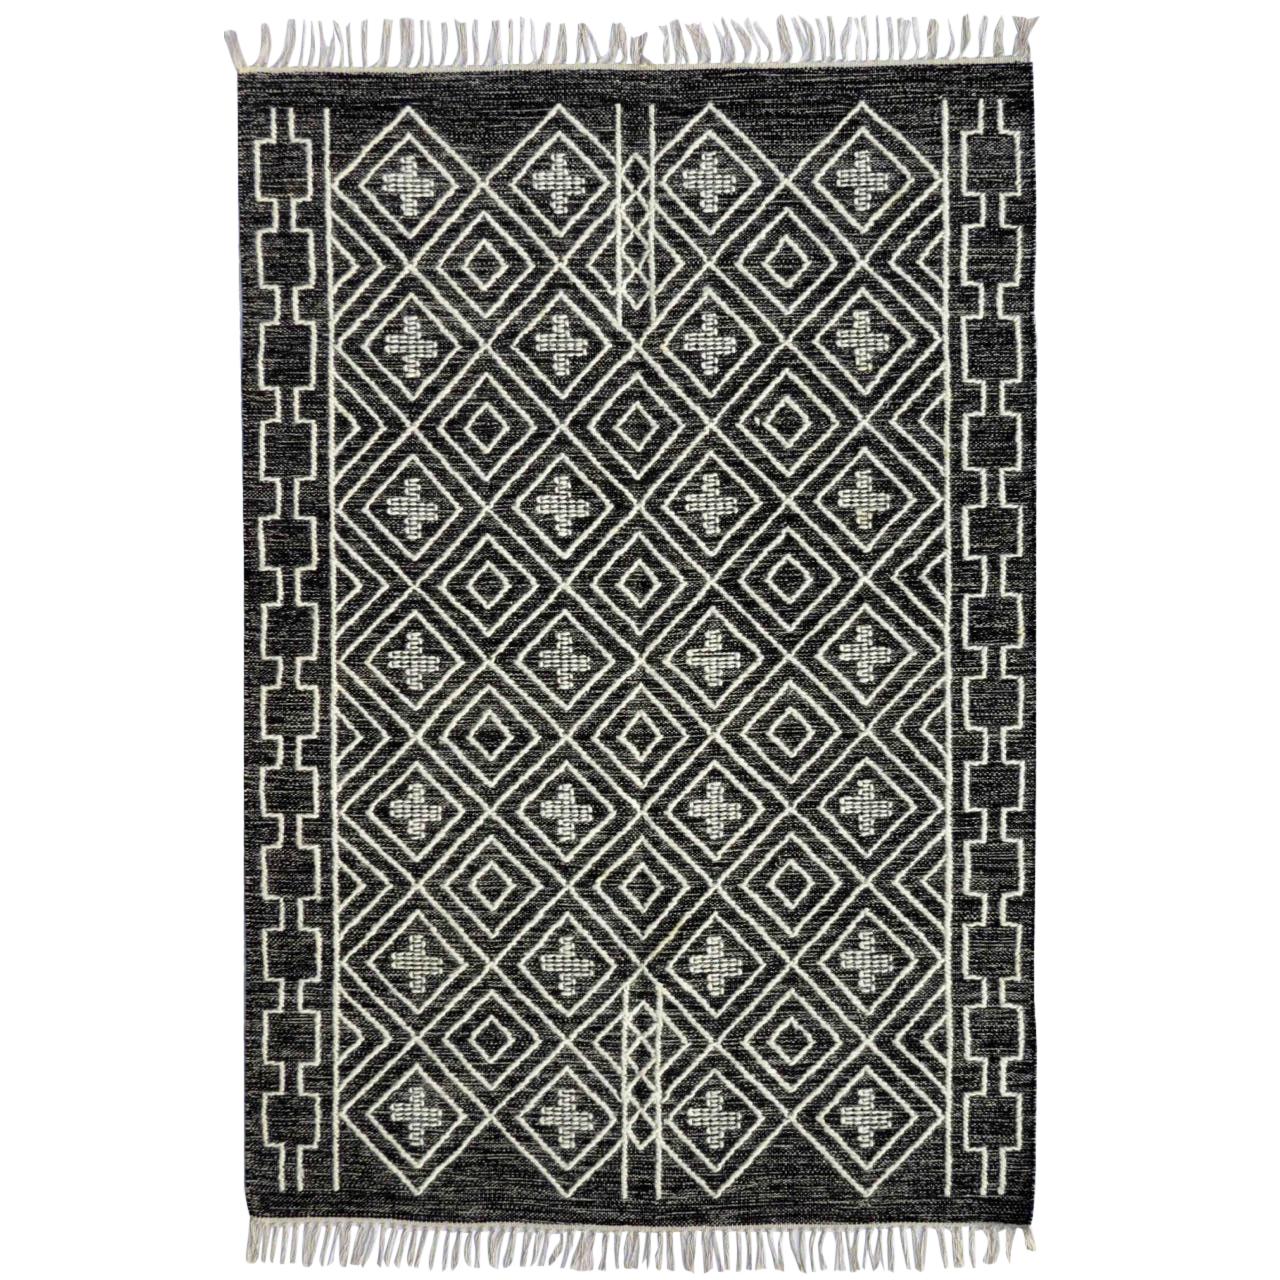 Beautiful New Tribal Moroccan Design Handwoven Kilim Rug size 6ft 6in x 9ft 10in For Sale